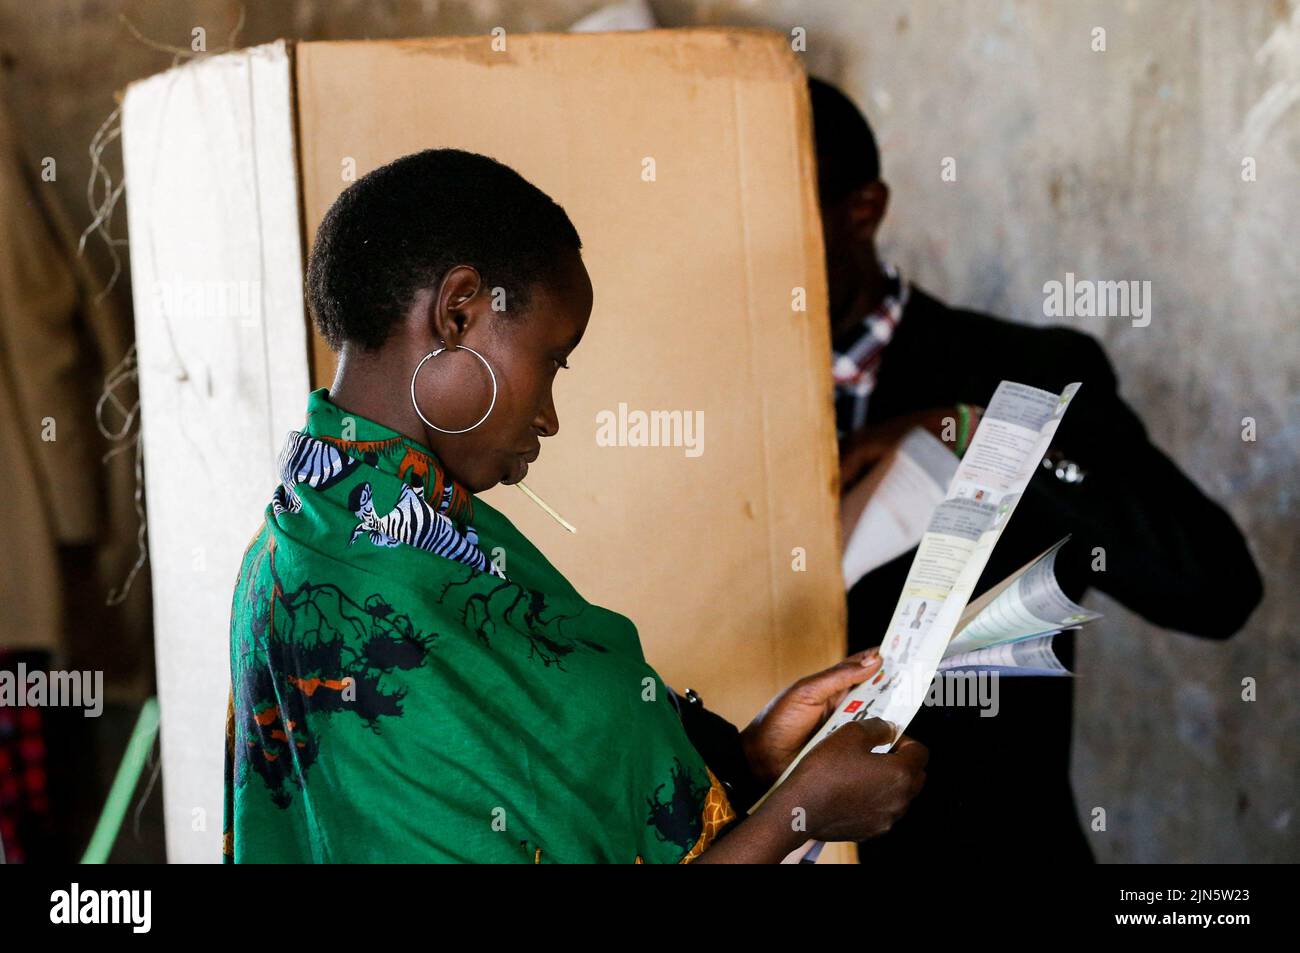 A Maasai traditional woman waits near a voting booth at a polling centre before casting her ballot during the general election by the Independent Electoral and Boundaries Commission (IEBC) at Ewaso Kedong primary school, in Kajiado county, Kenya August 9, 2022. REUTERS/Thomas Mukoya Stock Photo